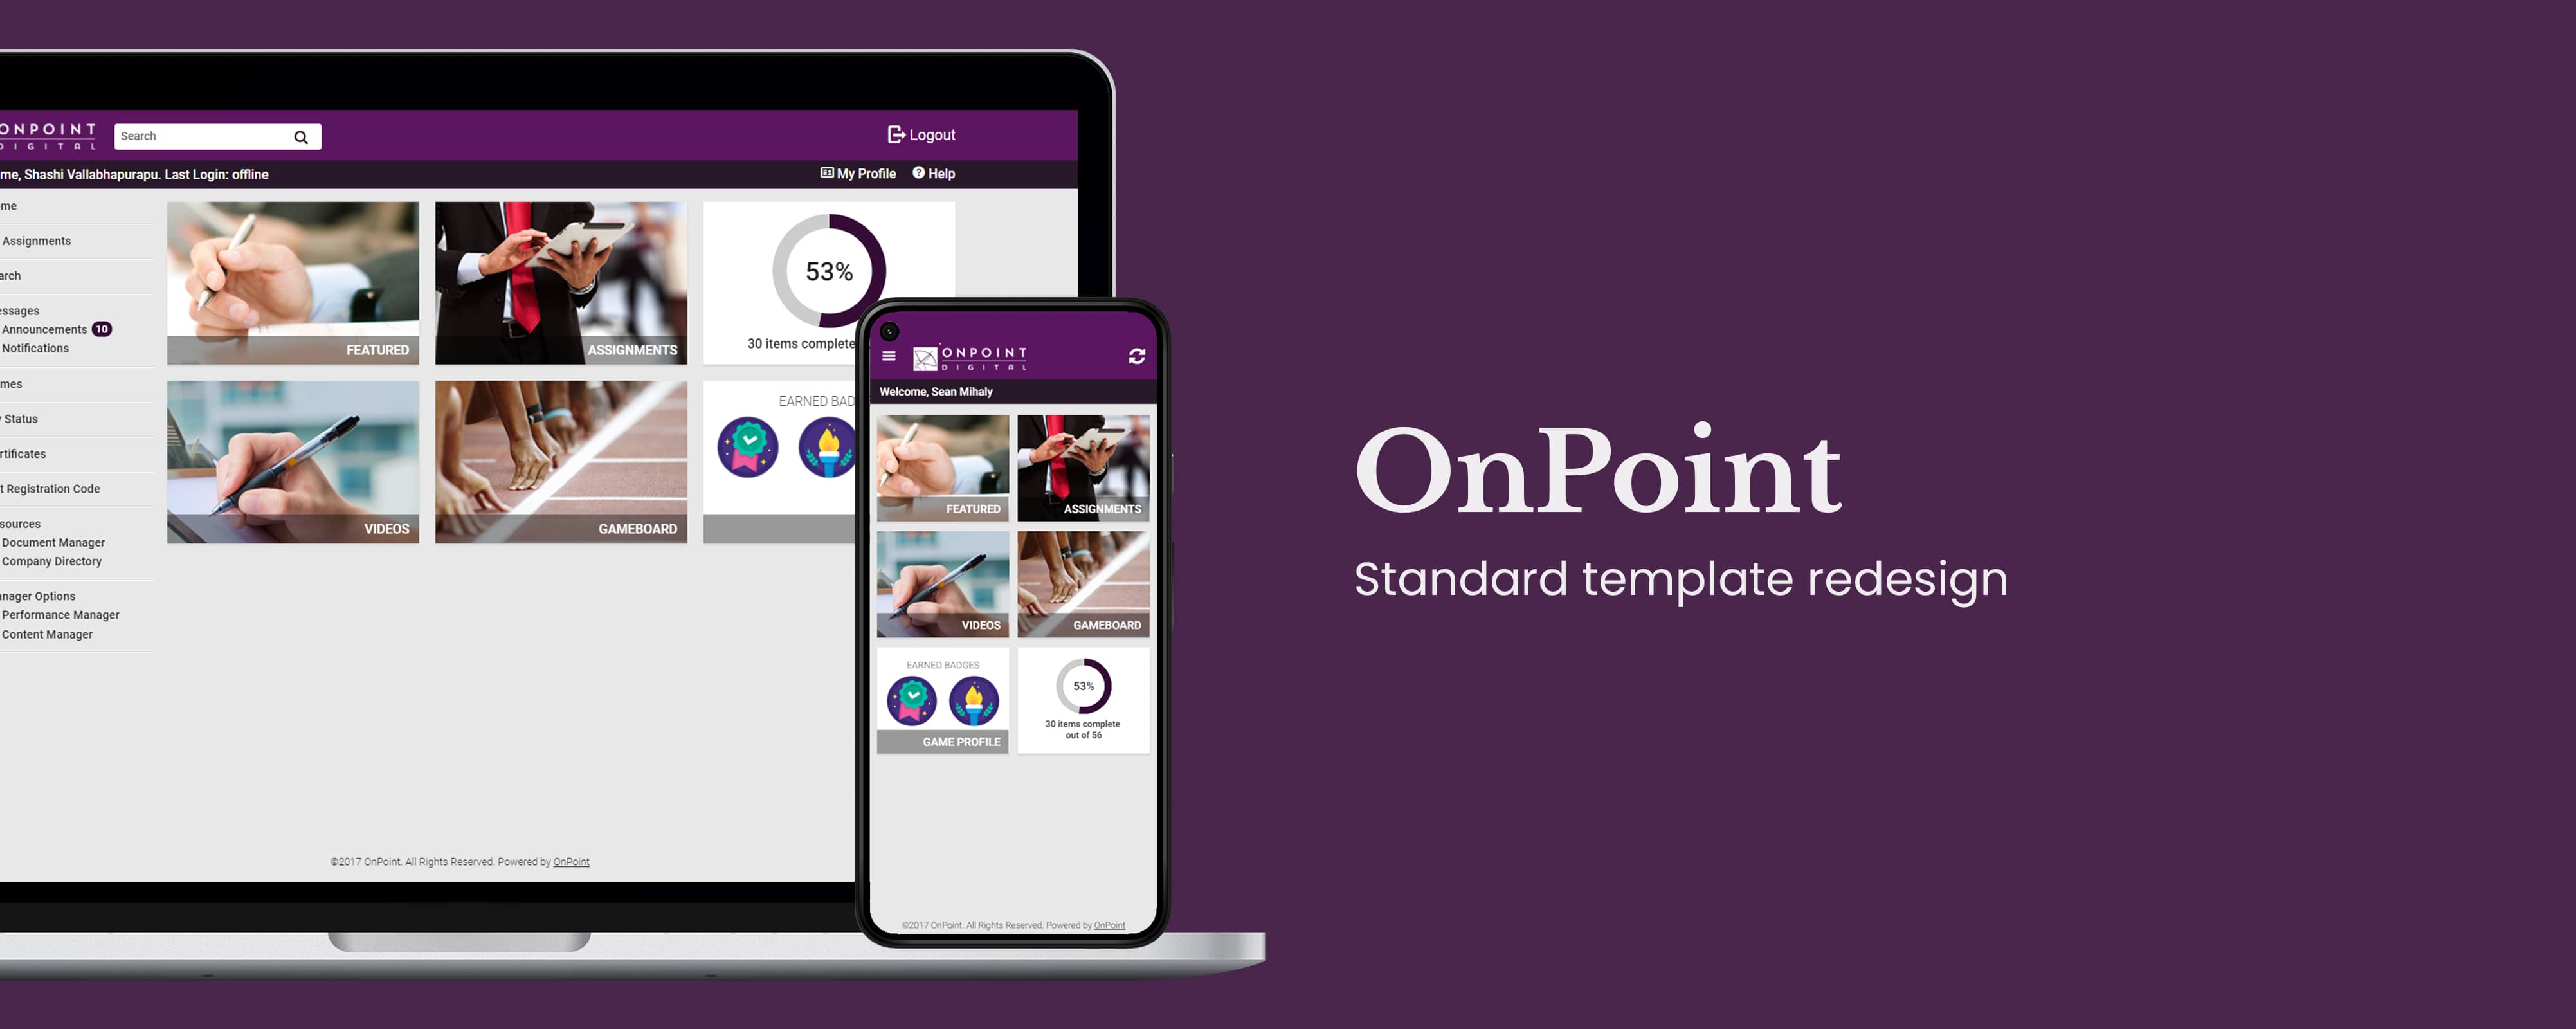 OnPoint: Standard template redesign